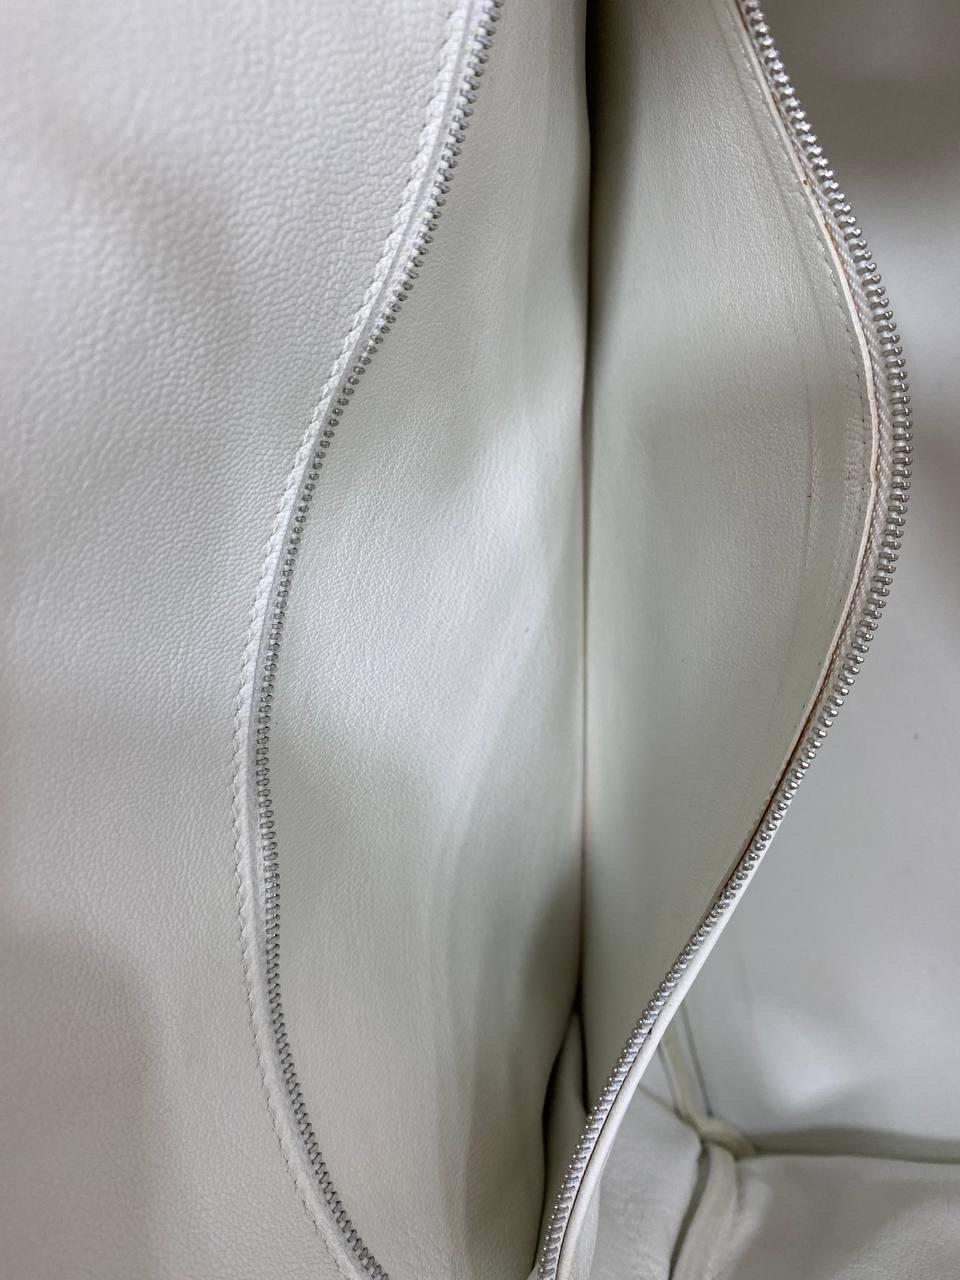 2011 Hermès Birkin 40 White Clemence Leather Top Handle Bag  For Sale 10